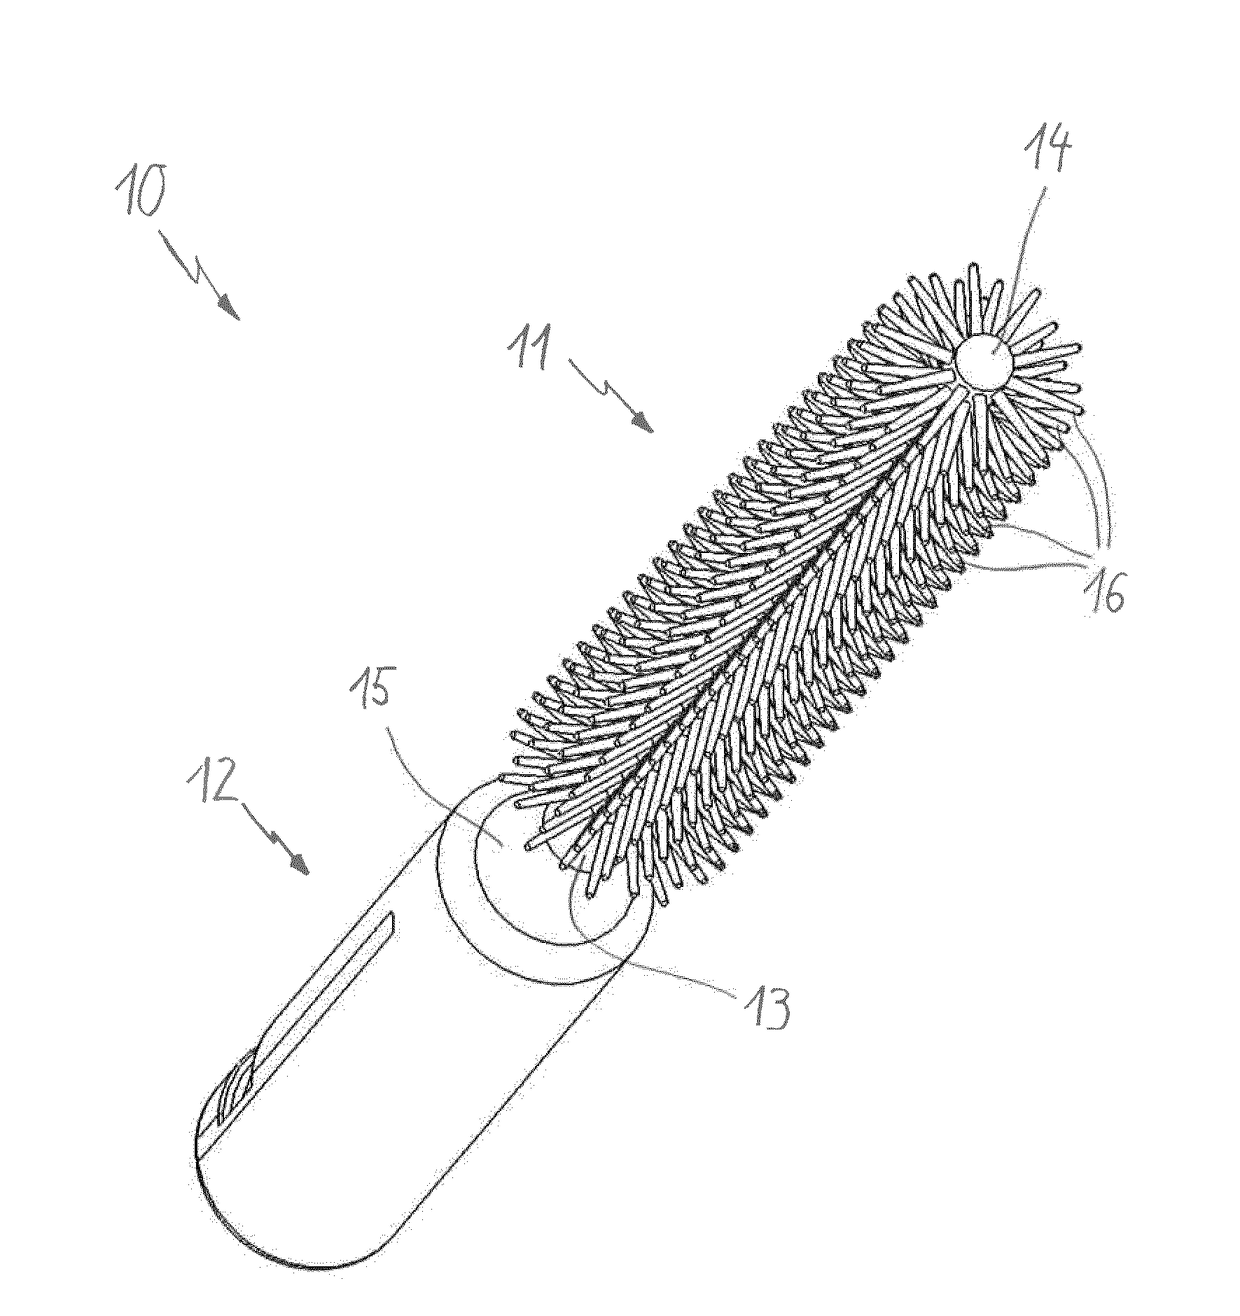 Interdental brush for cleaning interdental spaces and/or dental implants